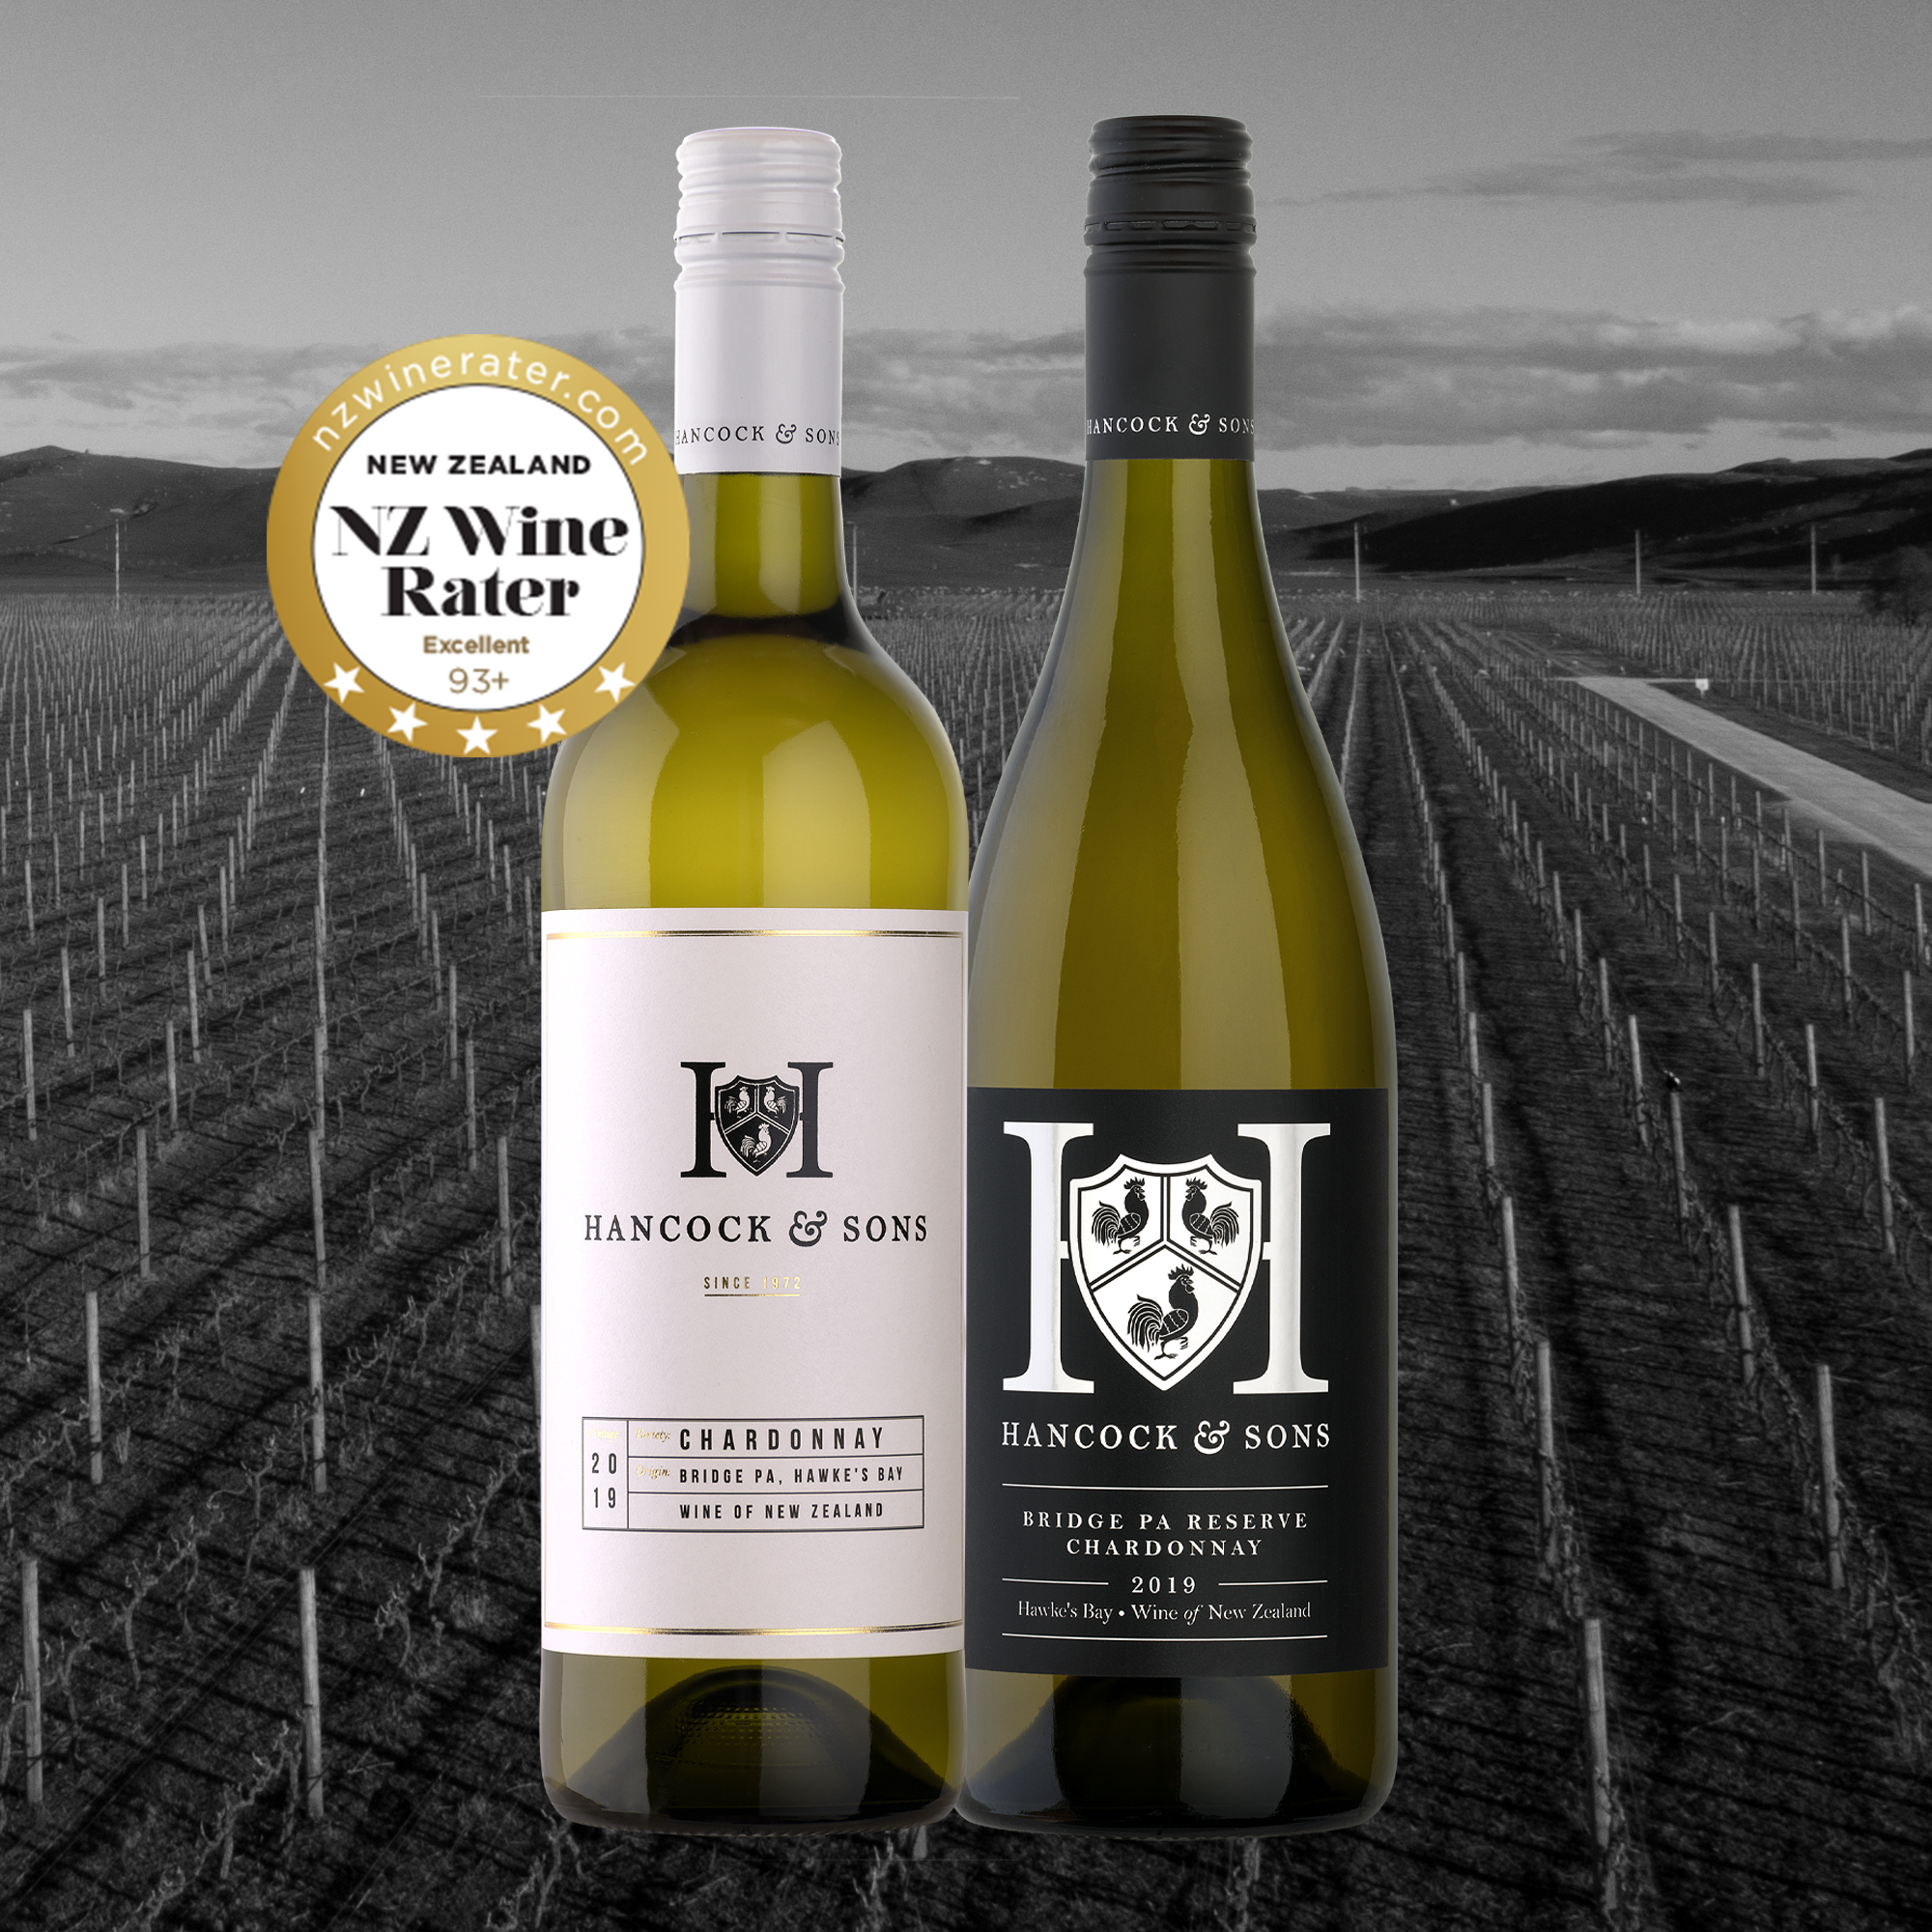 5 Star Ratings in 2021 NZ Wine Rater Awards.